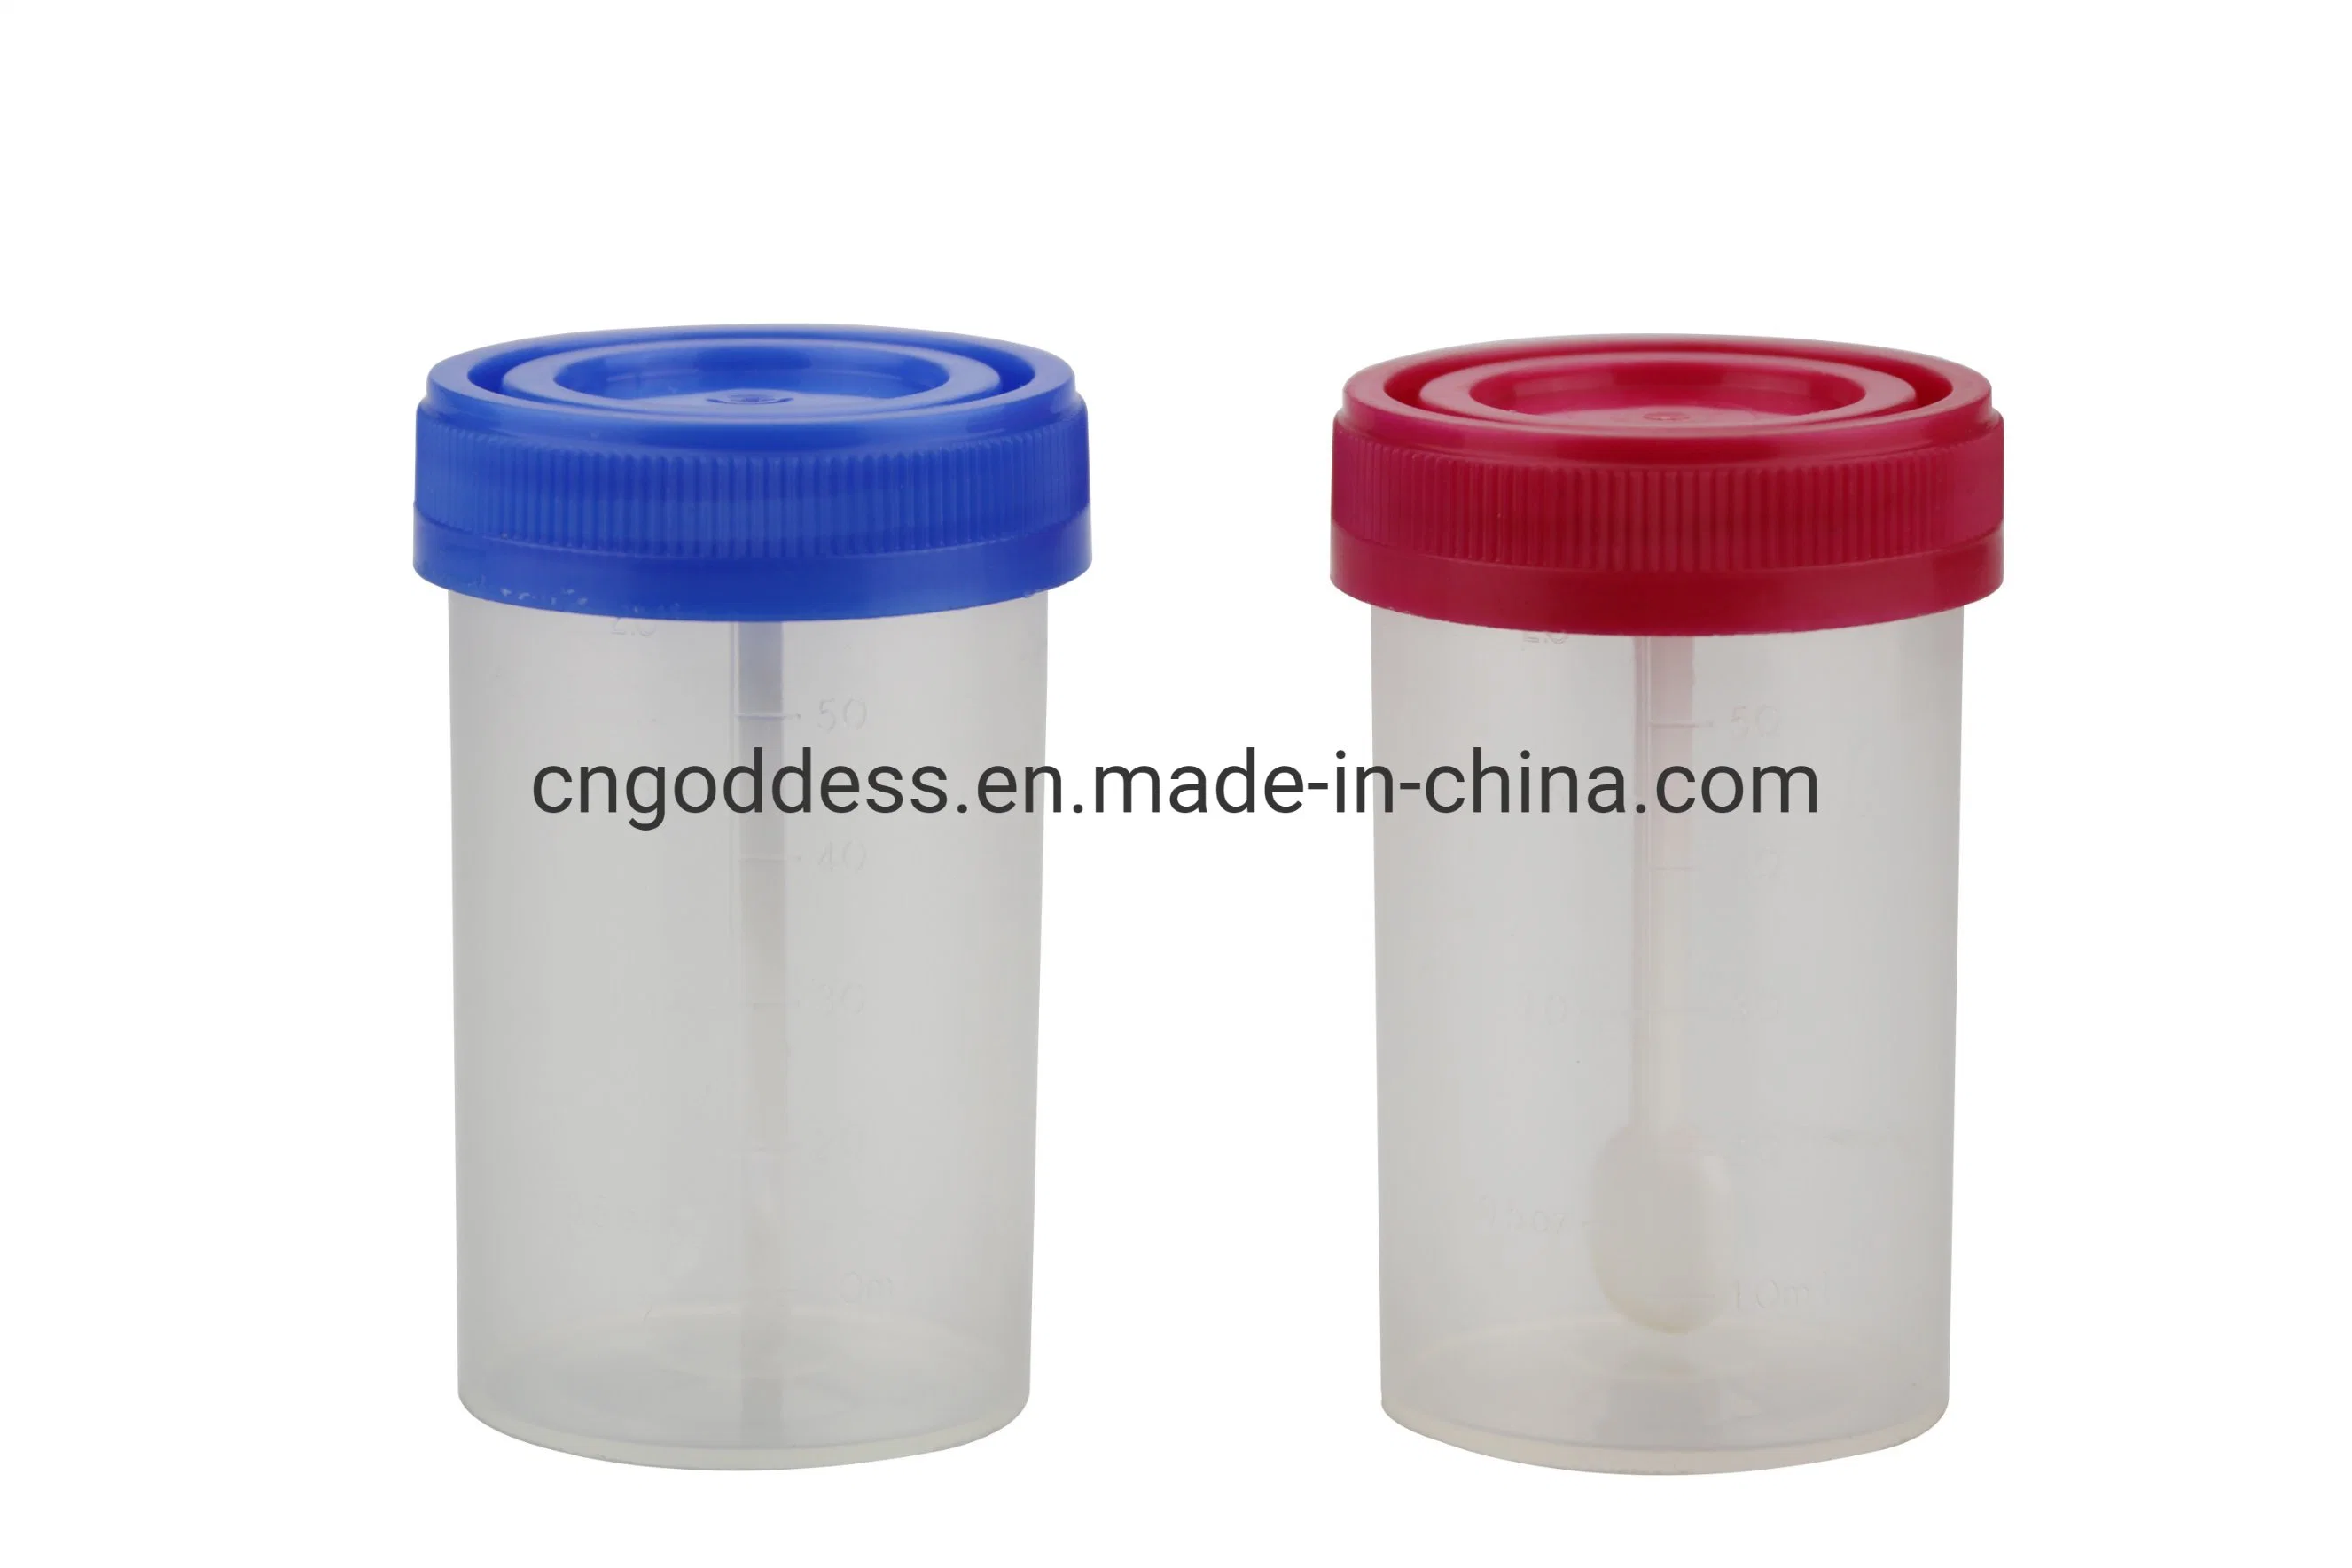 Urine Cup Sample Container Laboratory Specimen Collection Plastic Provided Lab Consumables Medical Polymer Materials & Products